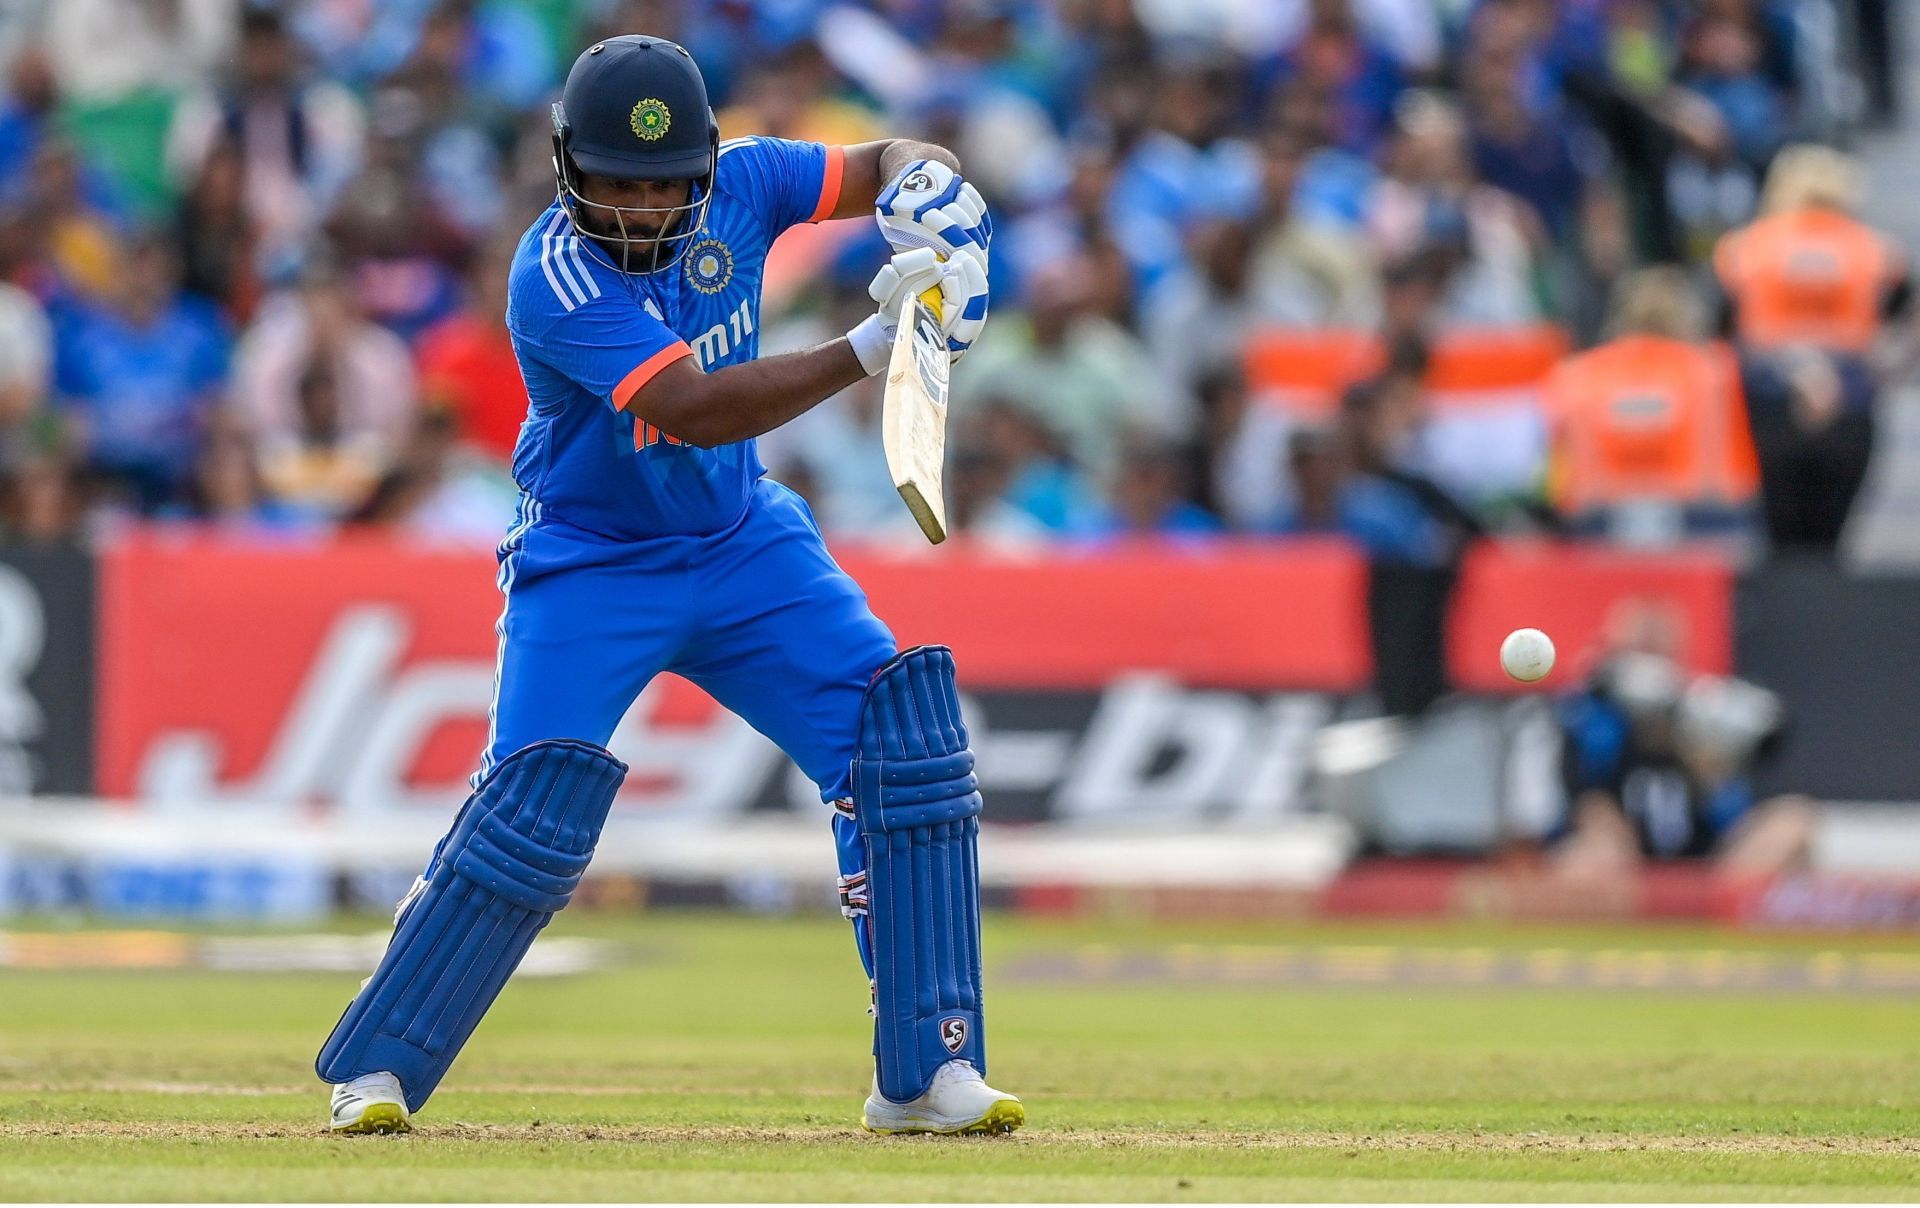 Sanju Samson took the attack to Ireland as Ruturaj Gaikwad meandered along at the other end